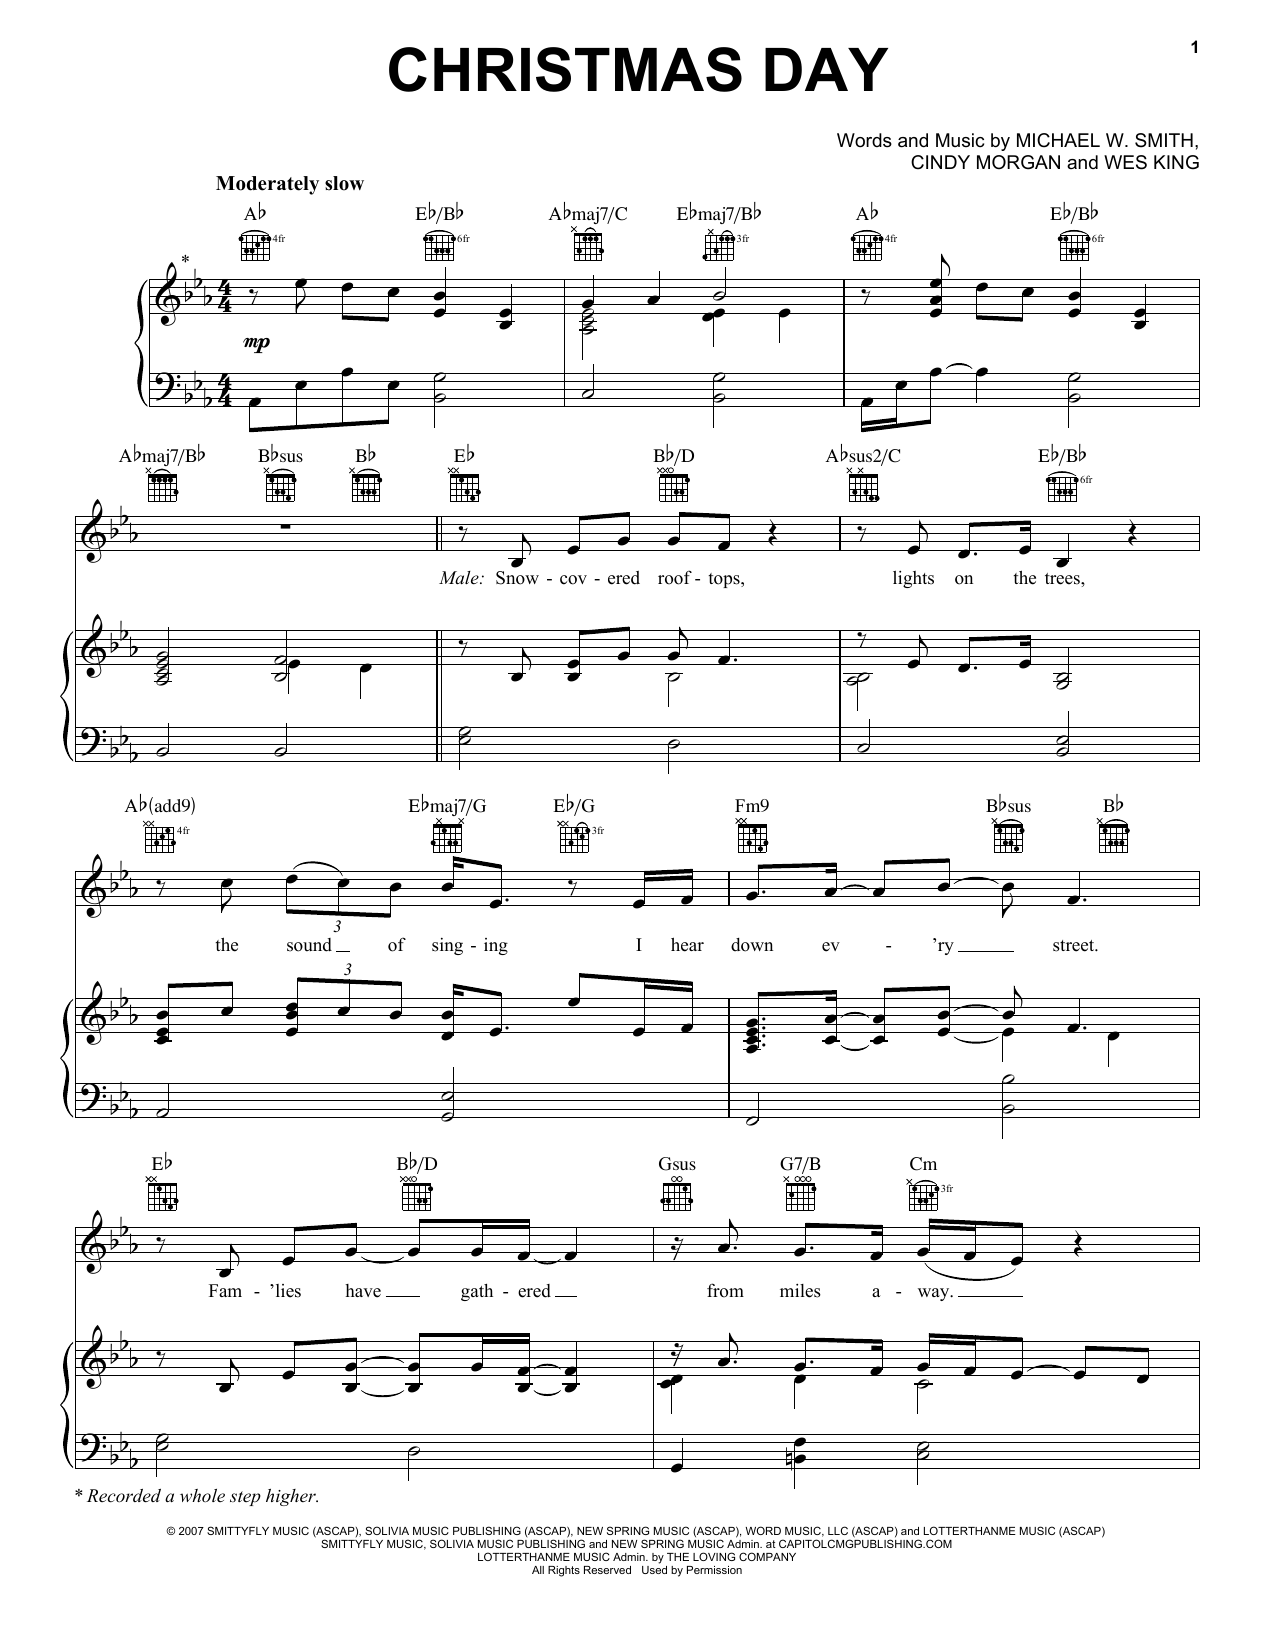 Download Michael W. Smith Christmas Day Sheet Music